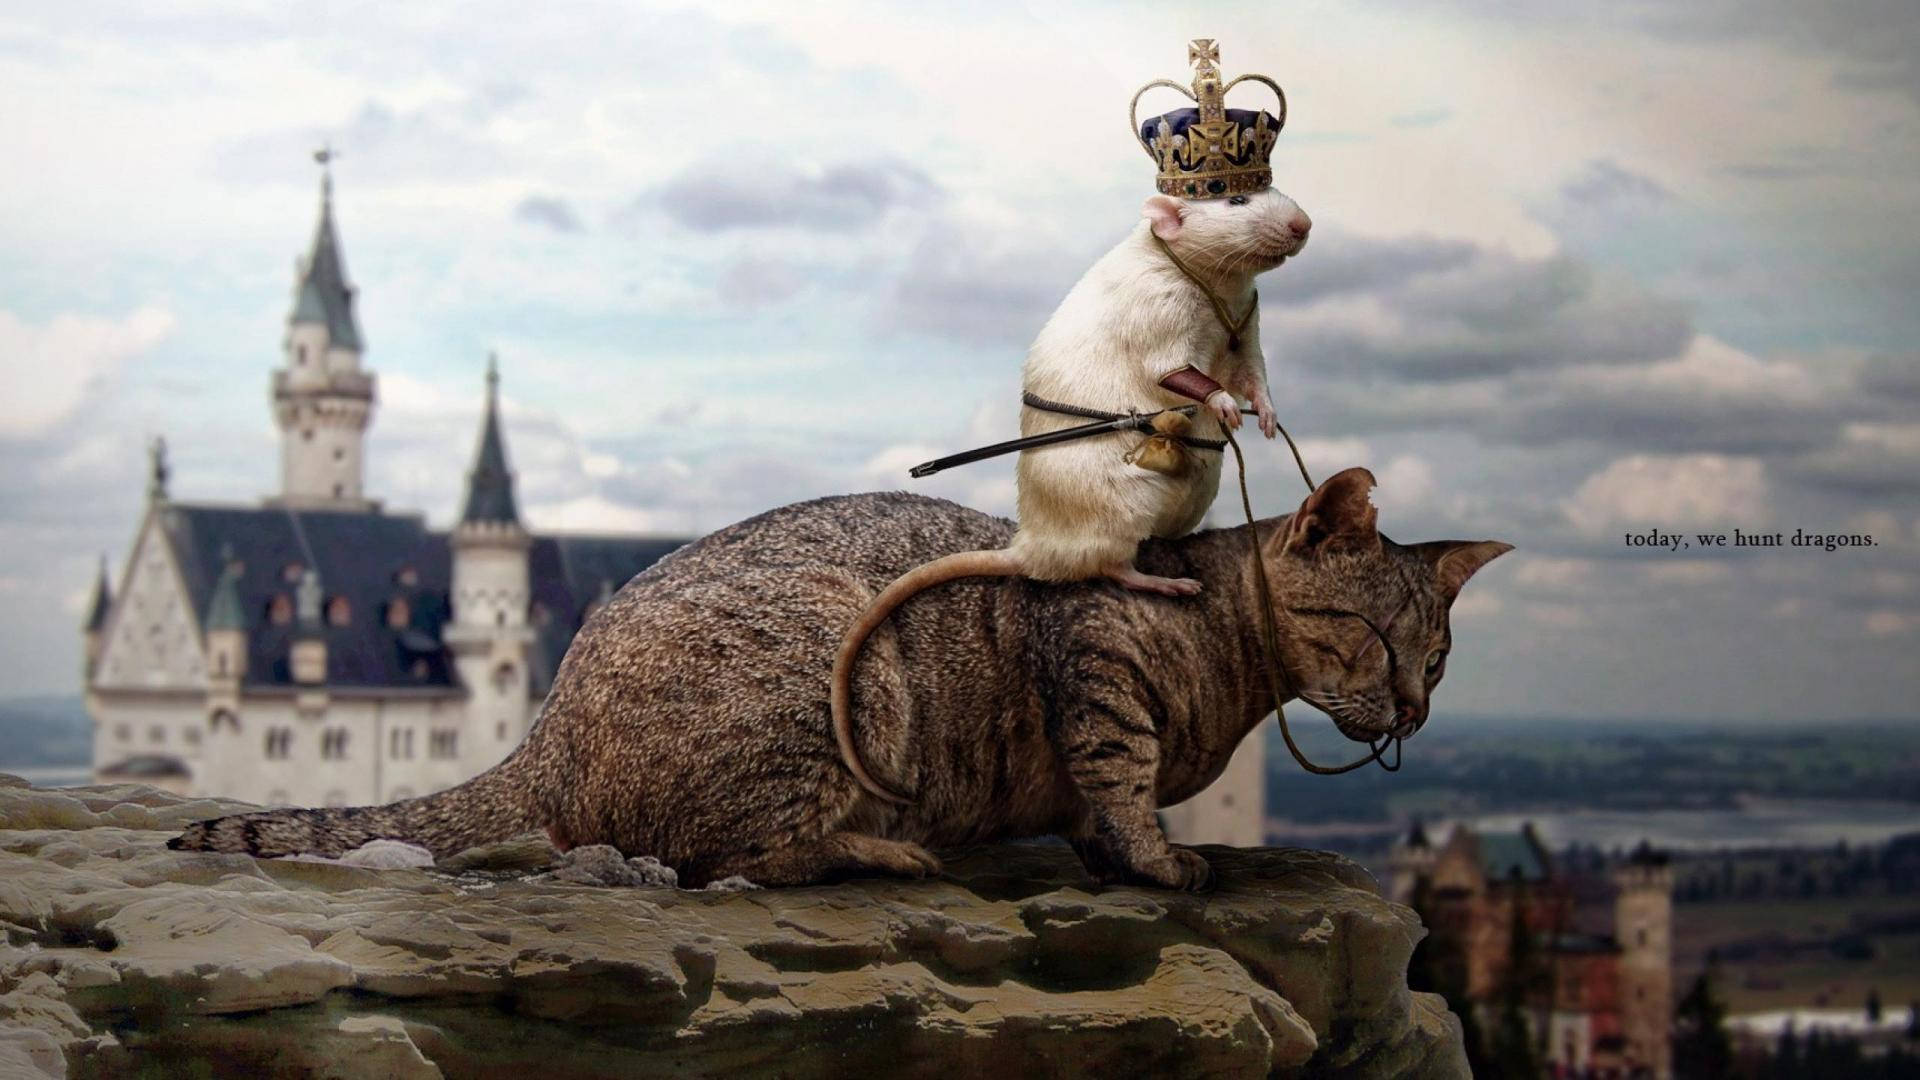 Unlikely Friends: Amusing snapshot of a Mouse Riding on a Cat Wallpaper